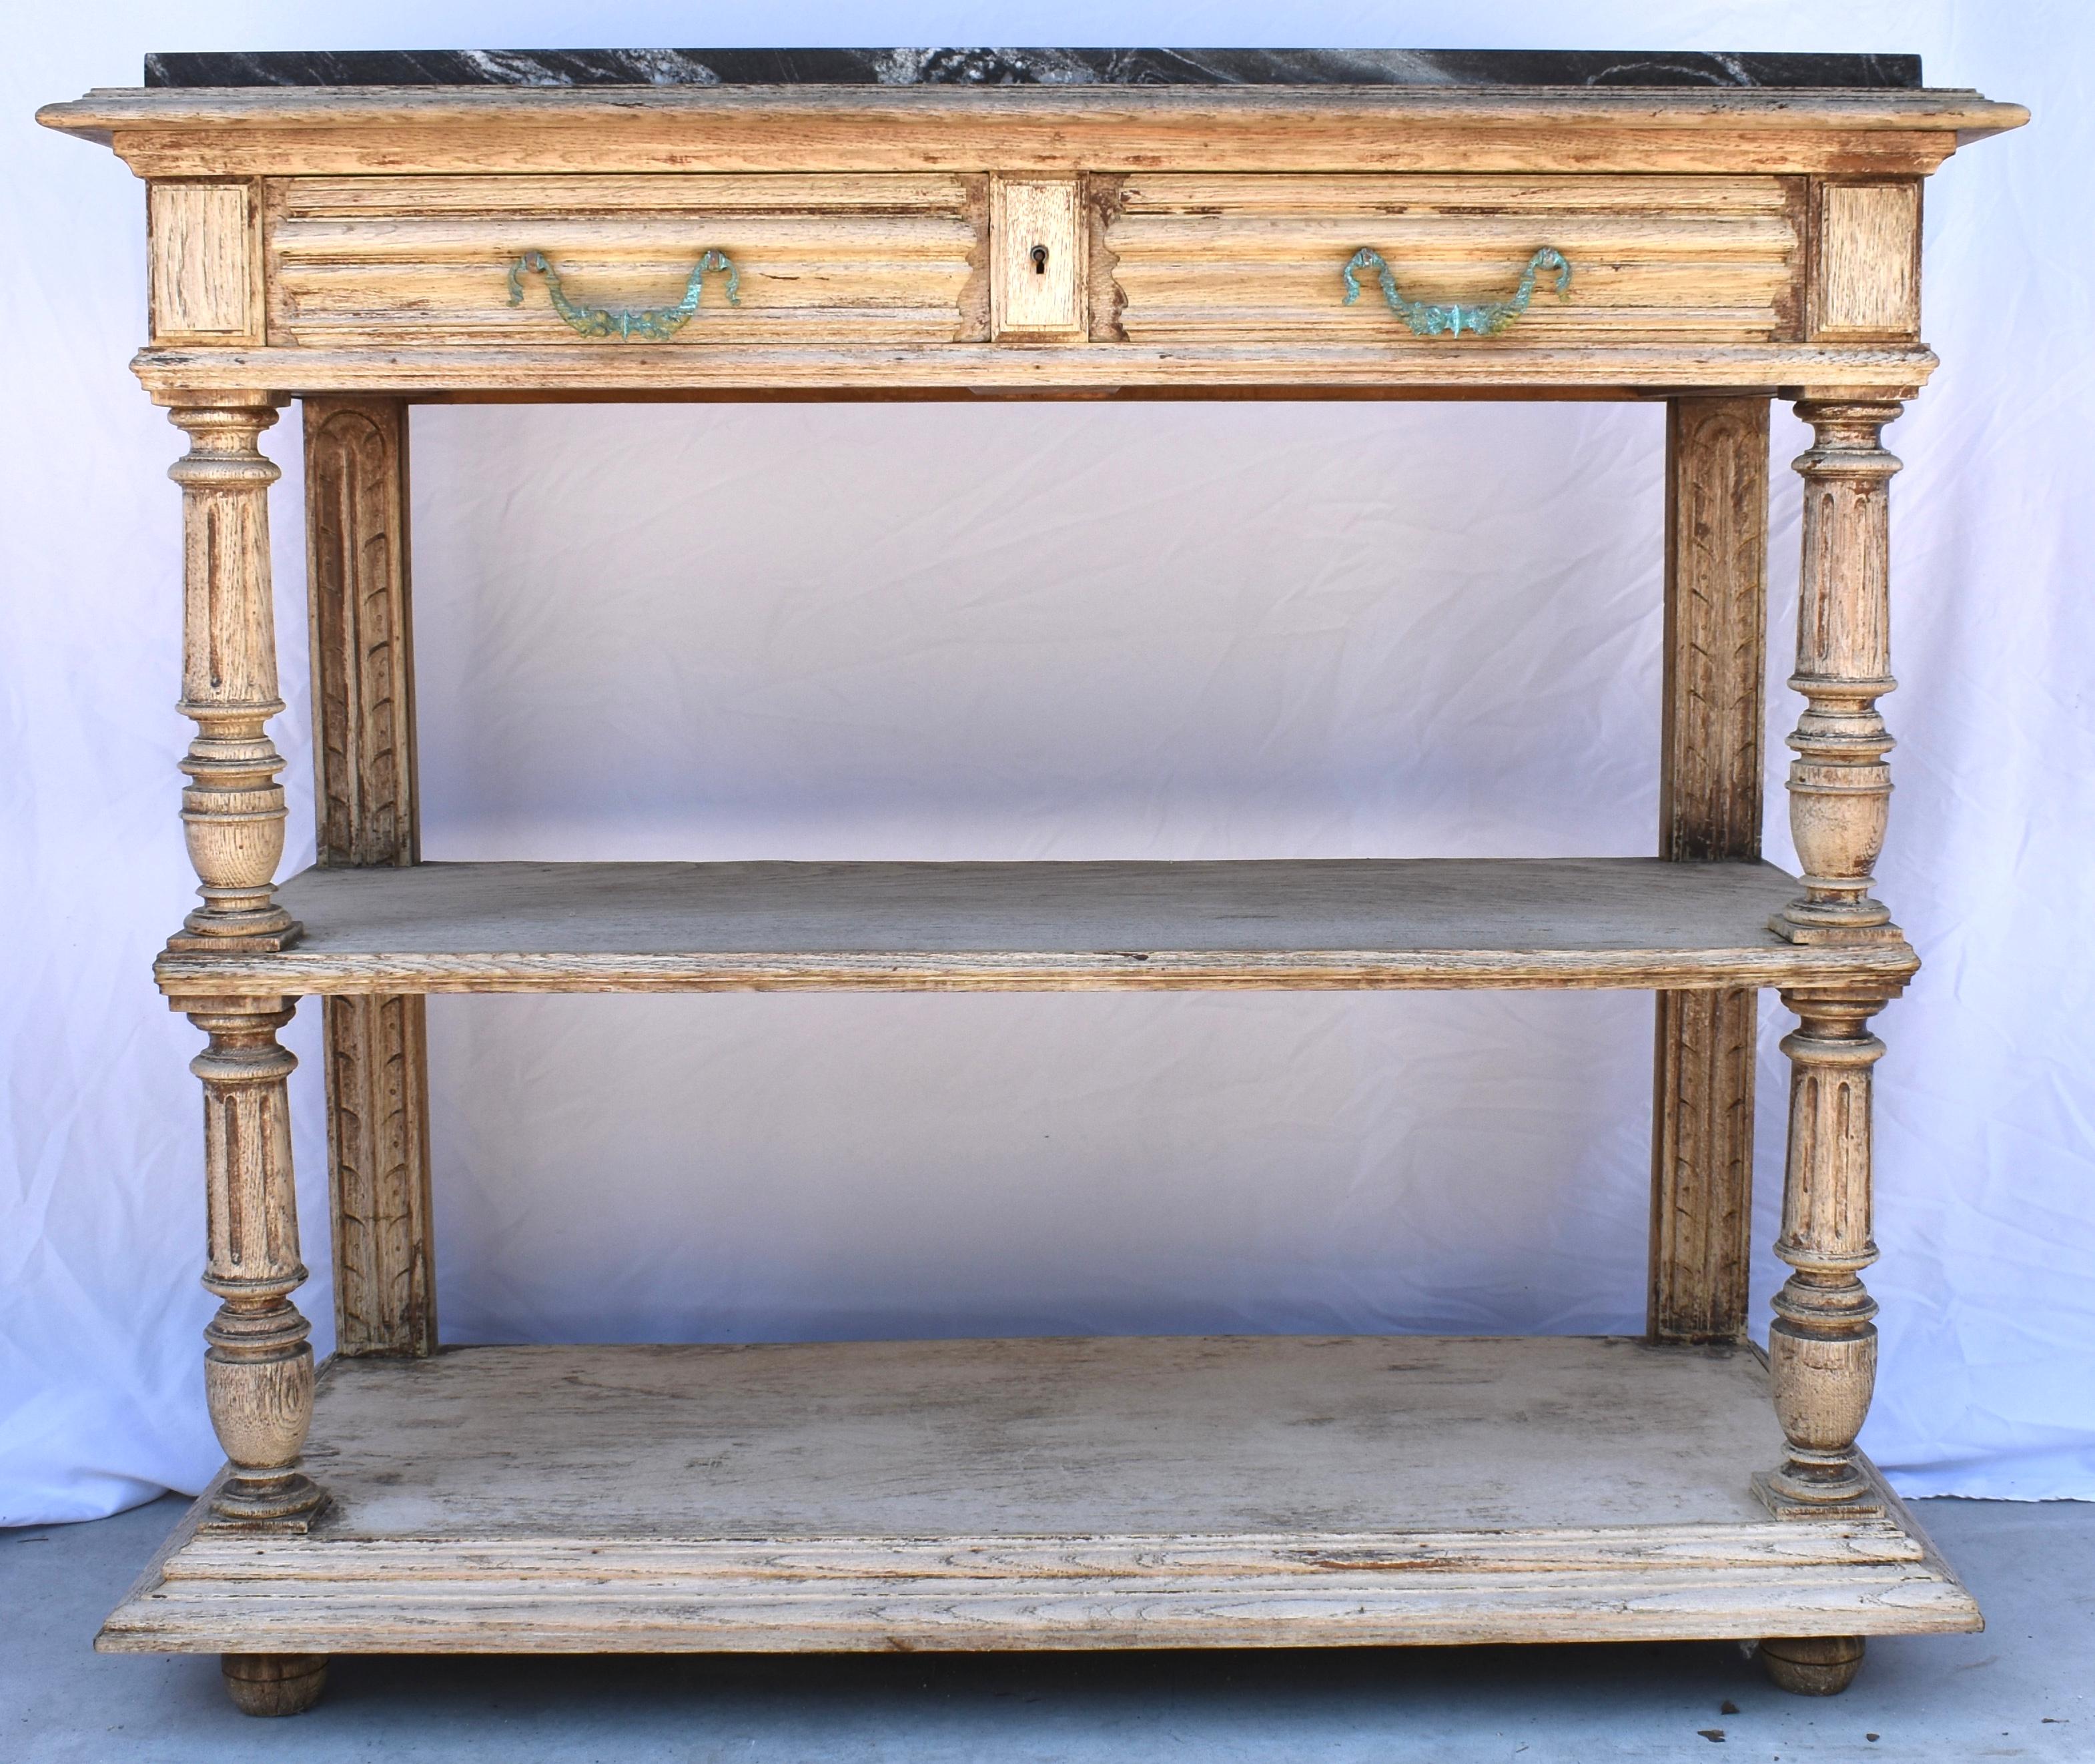 Built in France in the late 1800s using oak this sideboard is topped by black marble (replaced) and is absolutely gorgeous. The sideboard features two shelves, the bottom one framed by tapered molding and sitting on bun feet. The middle shelf shows